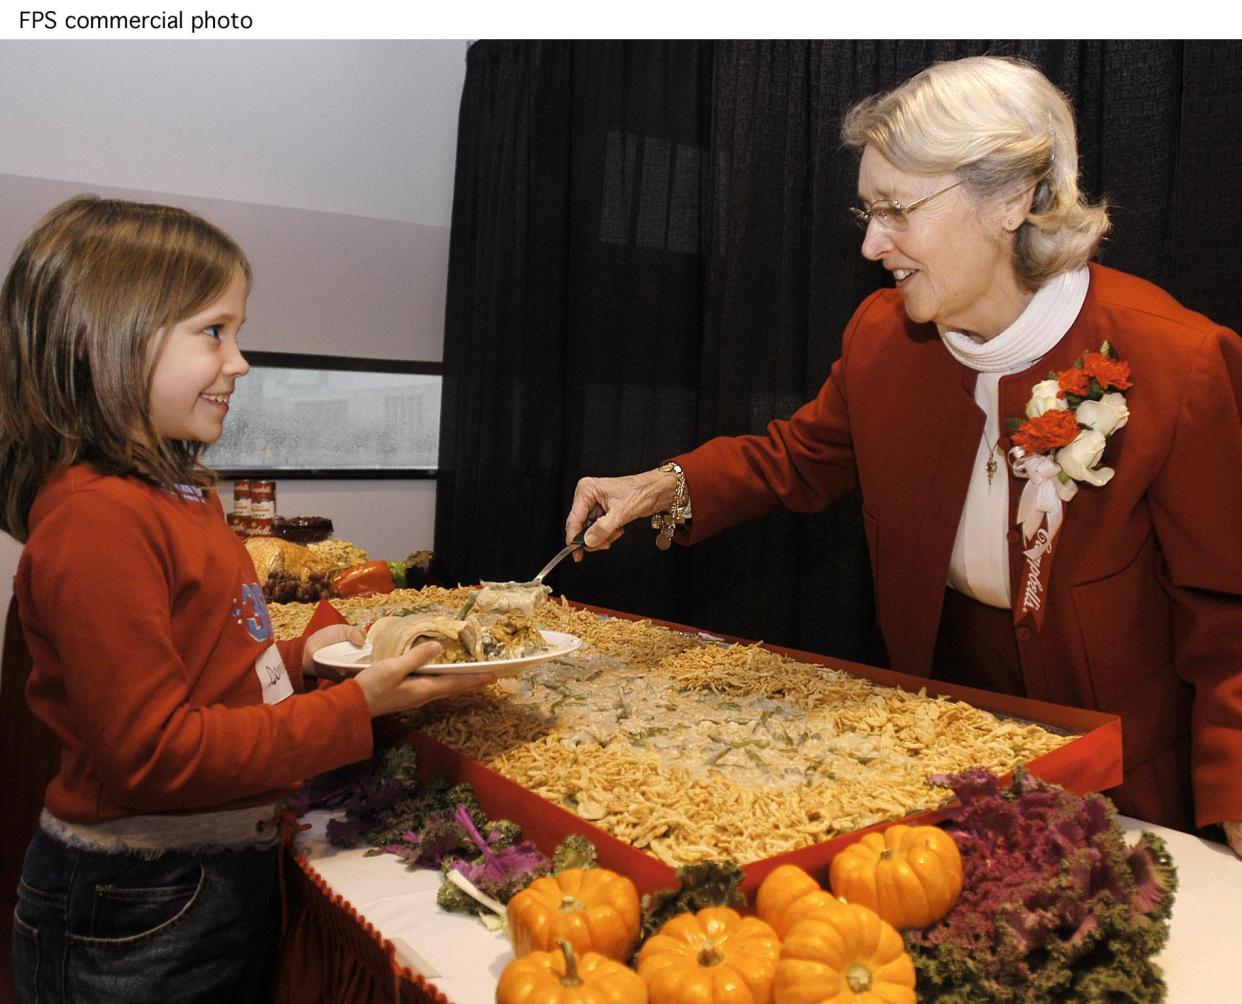 Dorcas Reilly, right, inventor of the Campbell's Soup Green Bean casserole serves a helping of the casserole to Dominique Cupp, 8, from Roosevelt Elementary School in Hubbard, OH, at the National Inventors Hall of Fame in Akron, OH, Tuesday, Nov. 19, 2002. The original recipe of the casserole was donated to the Hall of Fame archives by Reilly, former manager of Campbell's kitchens. The caserole has become a favorite during the holiday season alongside the turkey in over 20 million homes. (Feature PhotoService)